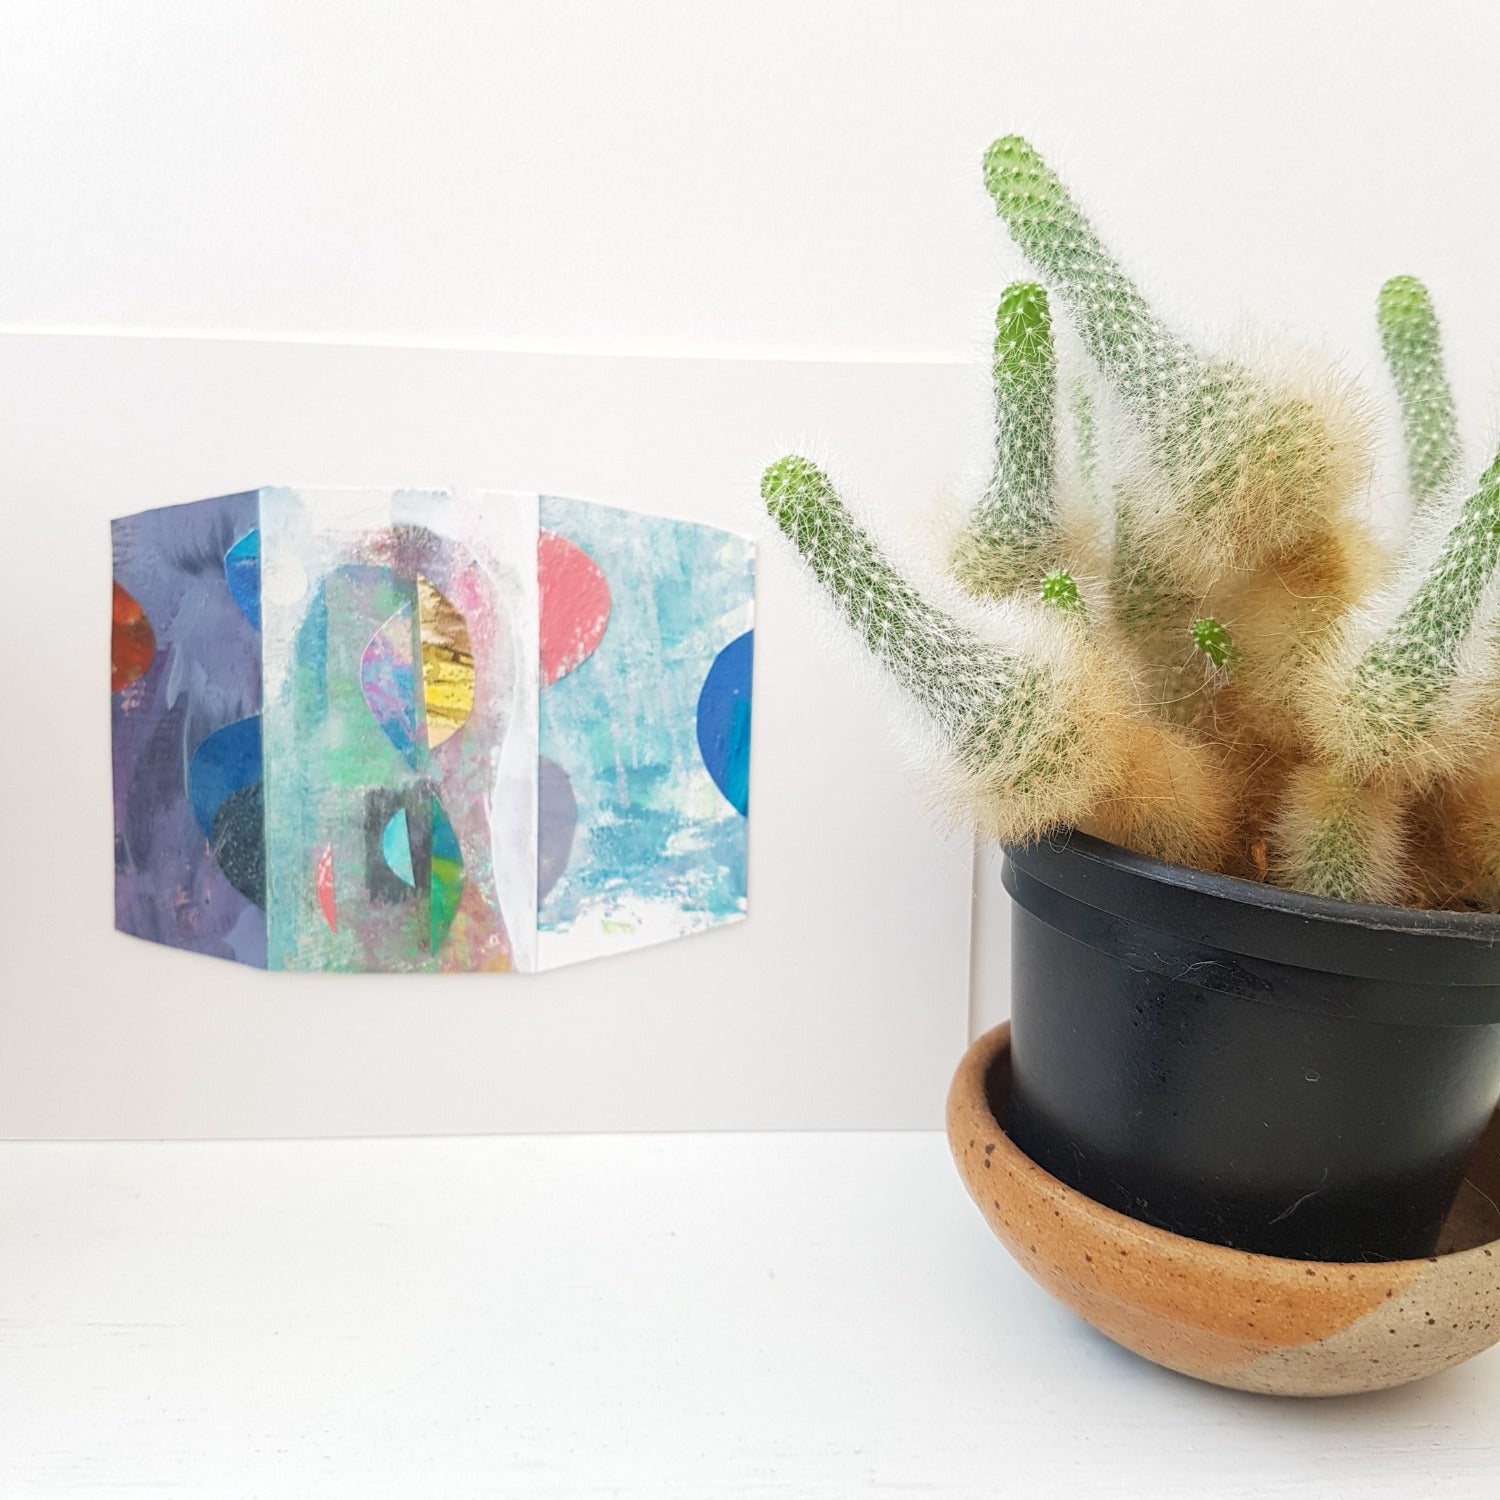 Collage by Julia Laing on a shelf beside a succulent plant.